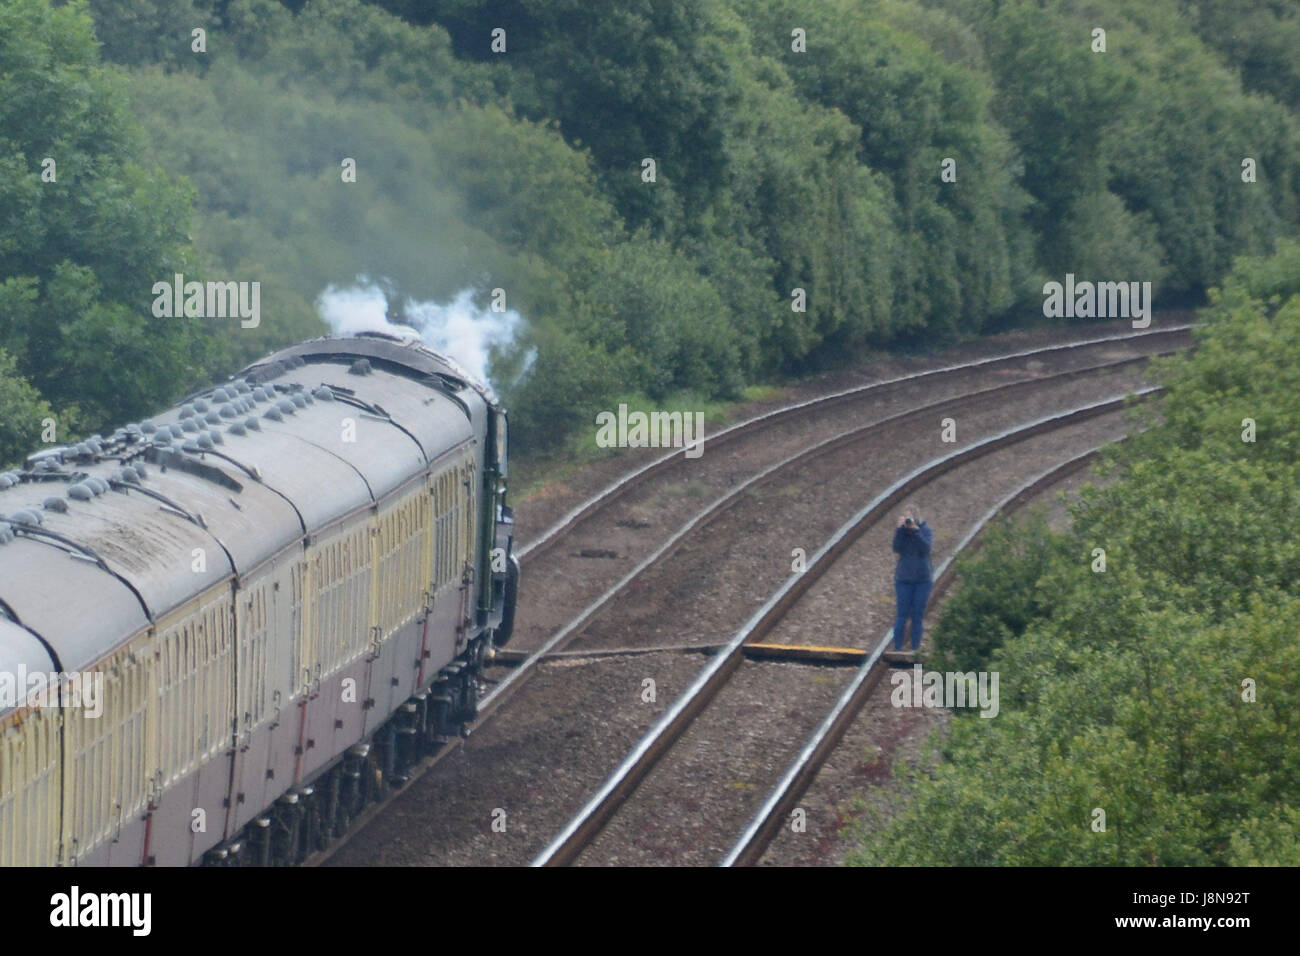 Marazion, Cornwall, UK. 29th May 2017. A trainspotter standing on the main London to Penzance track to get a photograph of the Tornado train steaming into Penzance yesterday. Credit: cwallpix/Alamy Live News Stock Photo